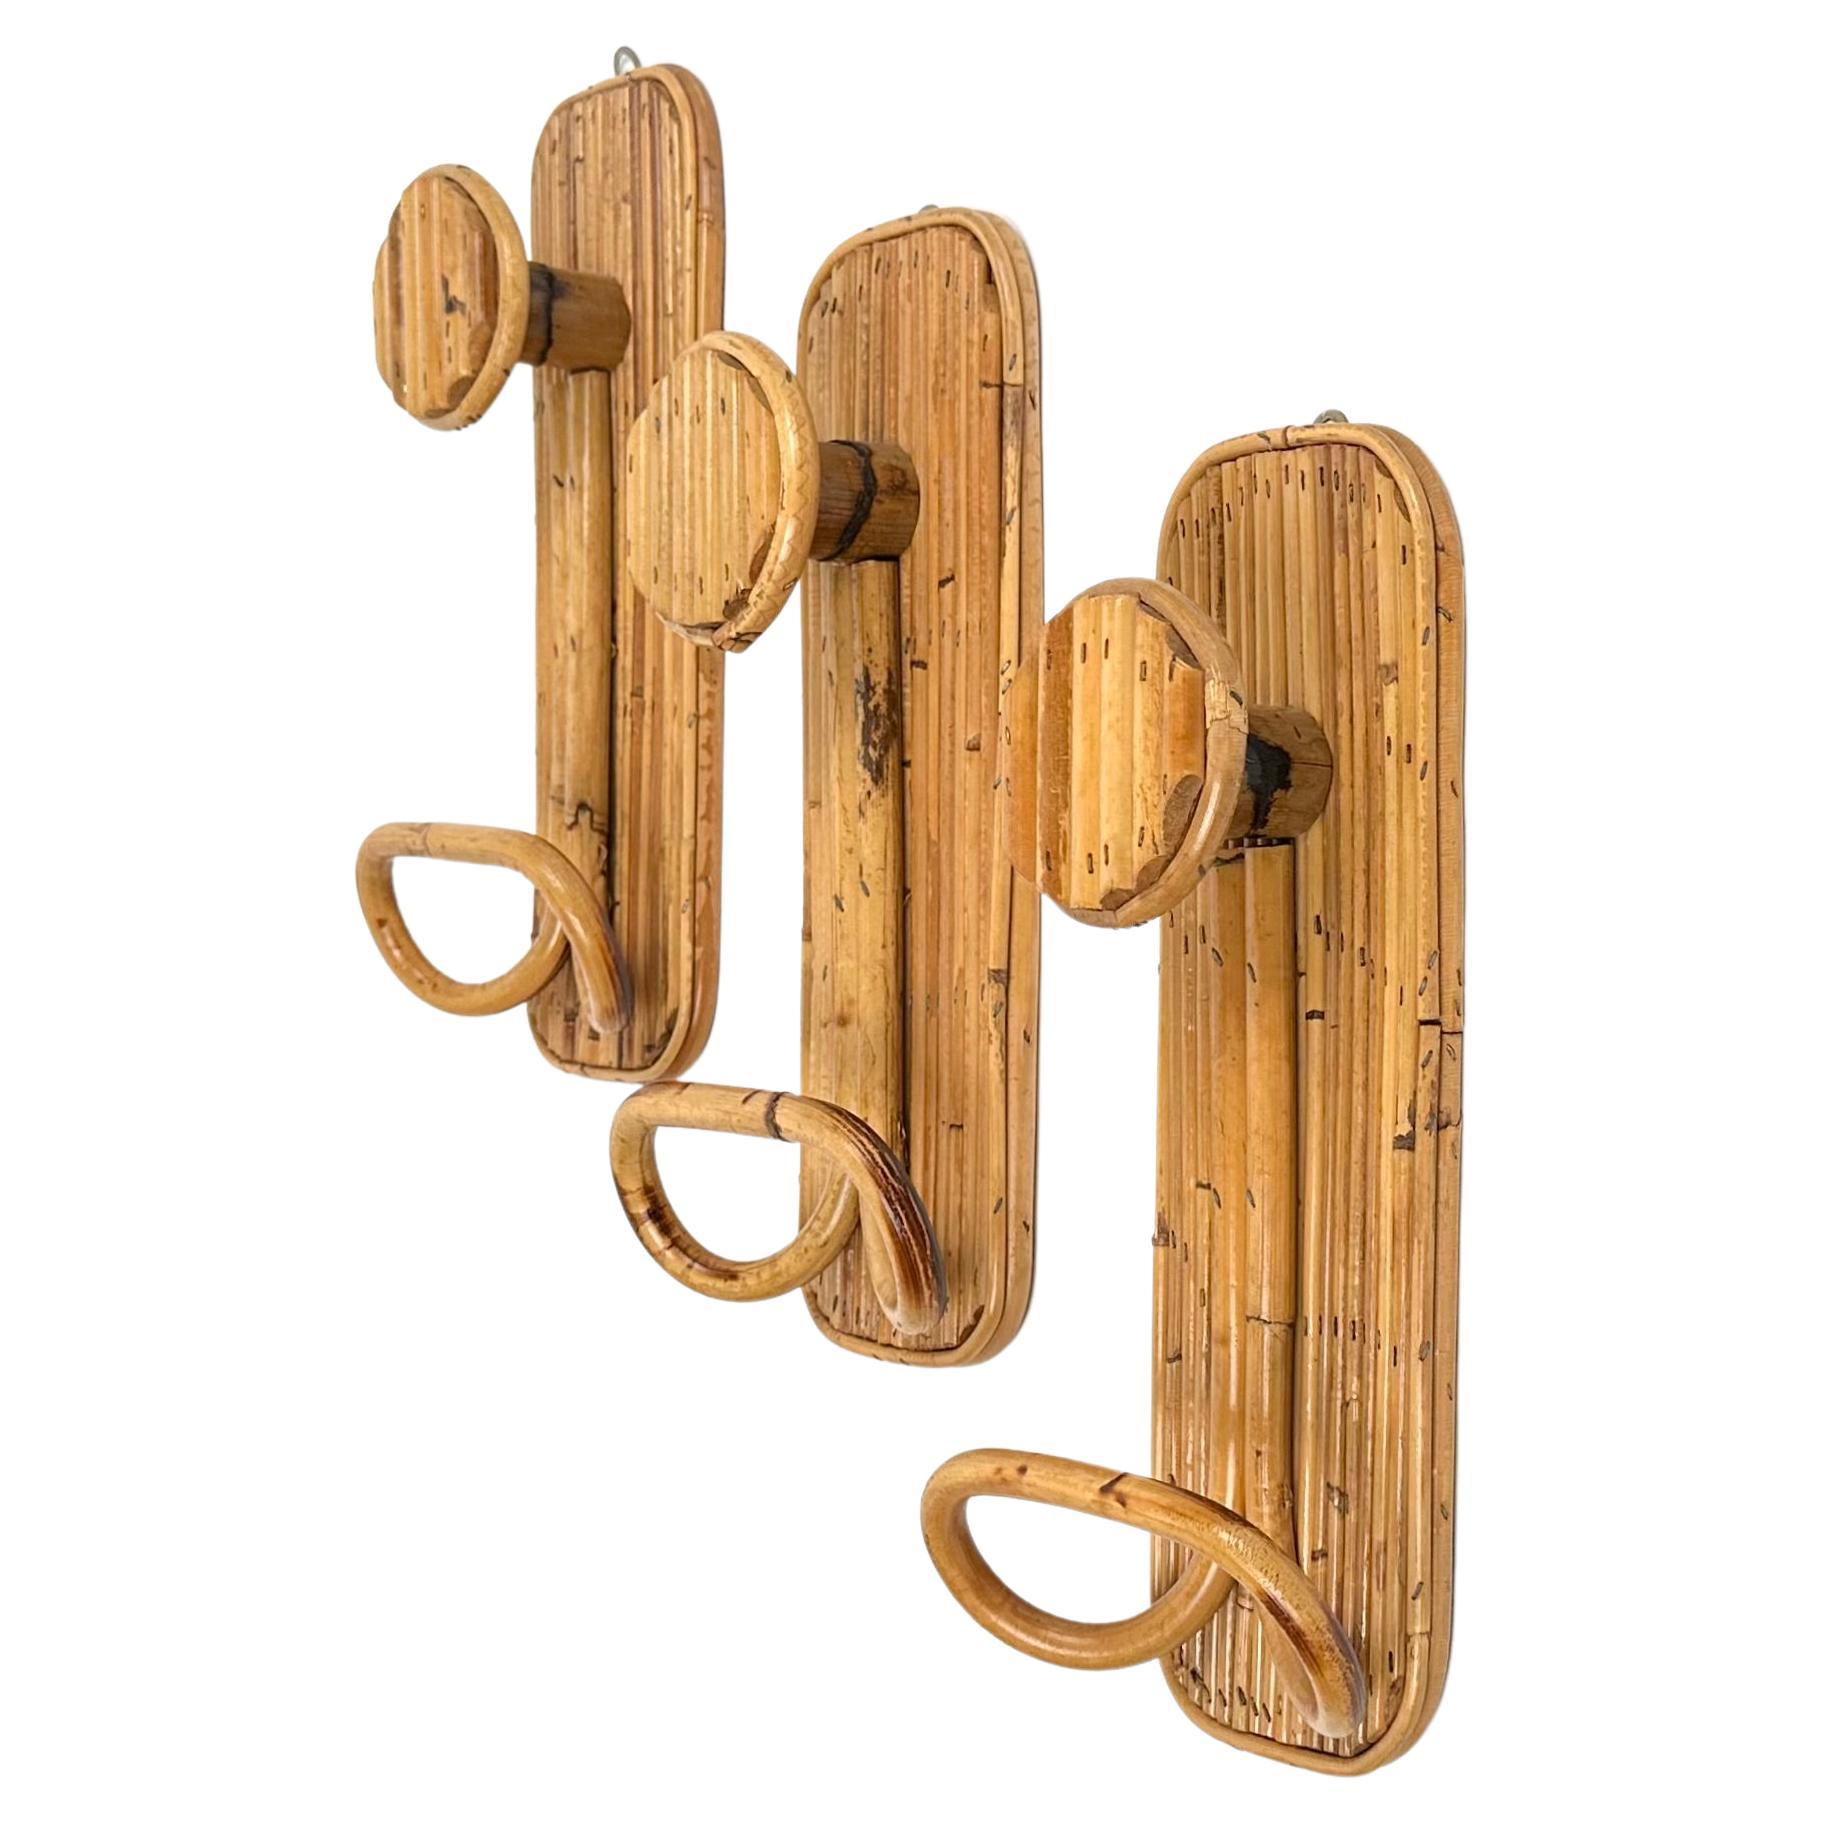 Set of three rectangular coat hangers in rattan and bamboo, double hook. 

Made in Italy in the 1970s.